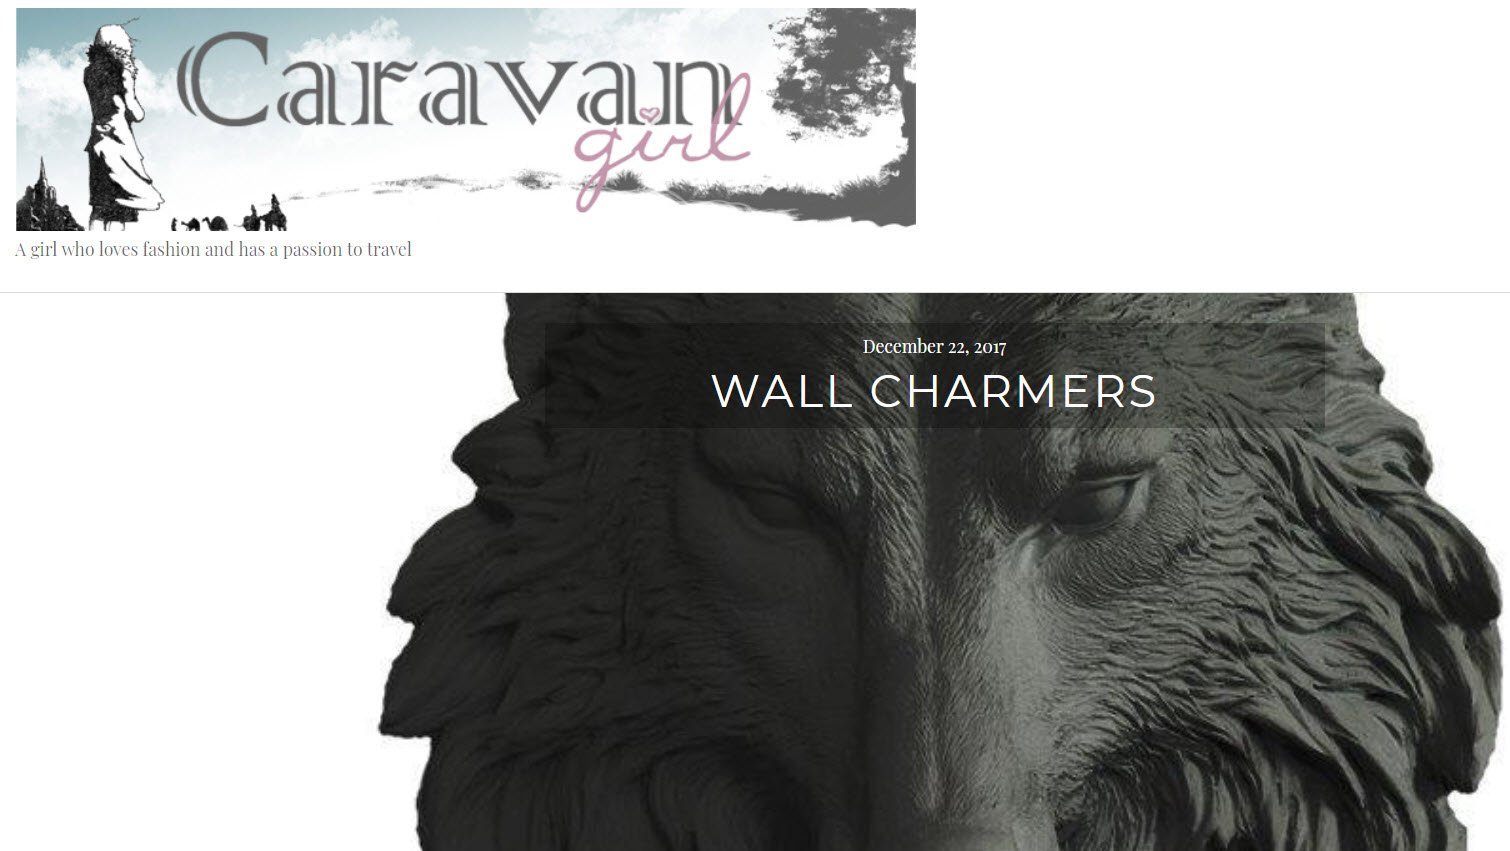 Wall Charmers Decor featured in Caravan Girl